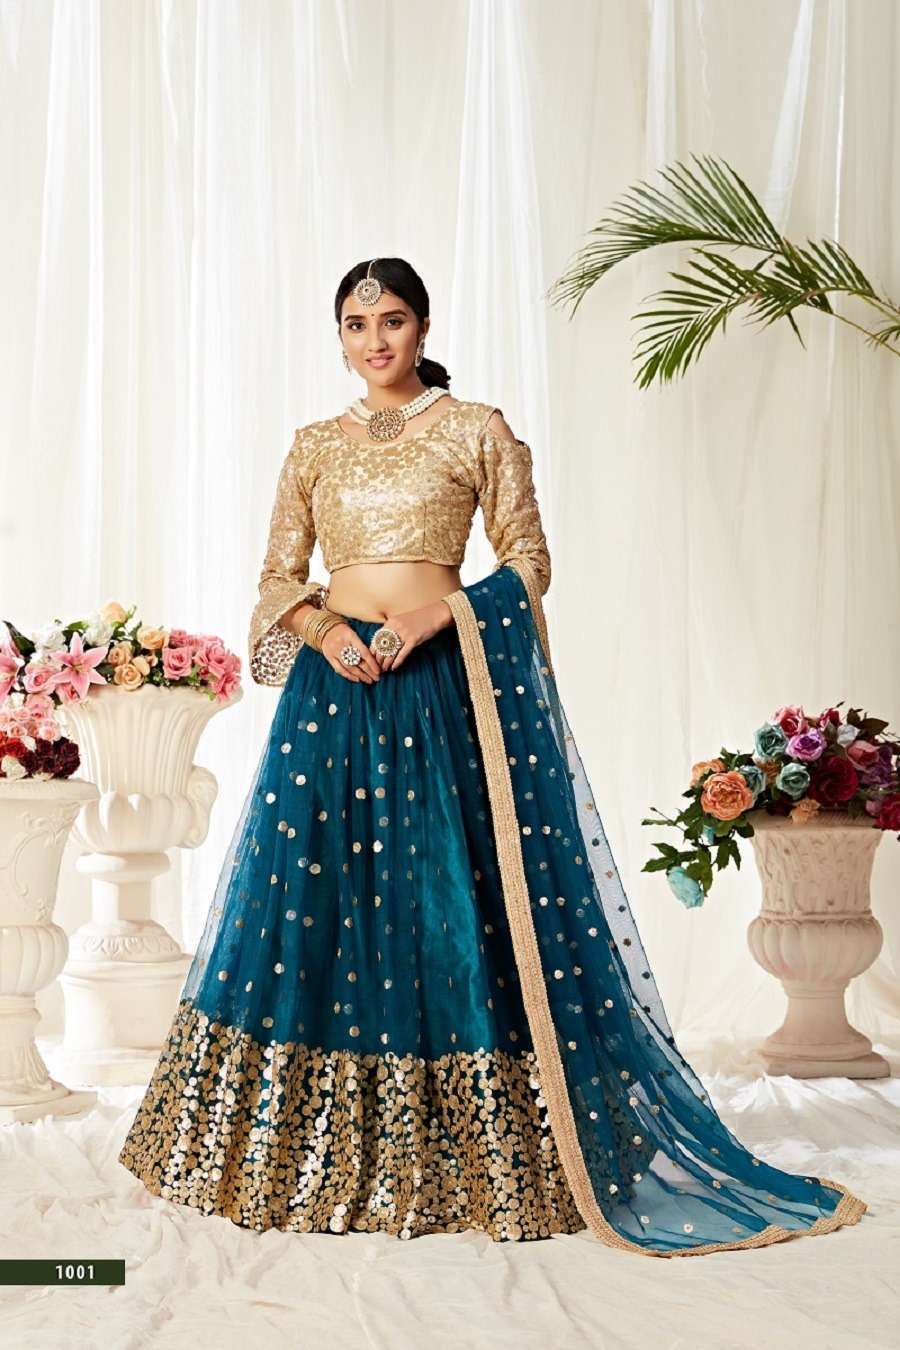 Which is the best place for buying Lehengas at cheap rates in Mumbai for  engagement? - Quora